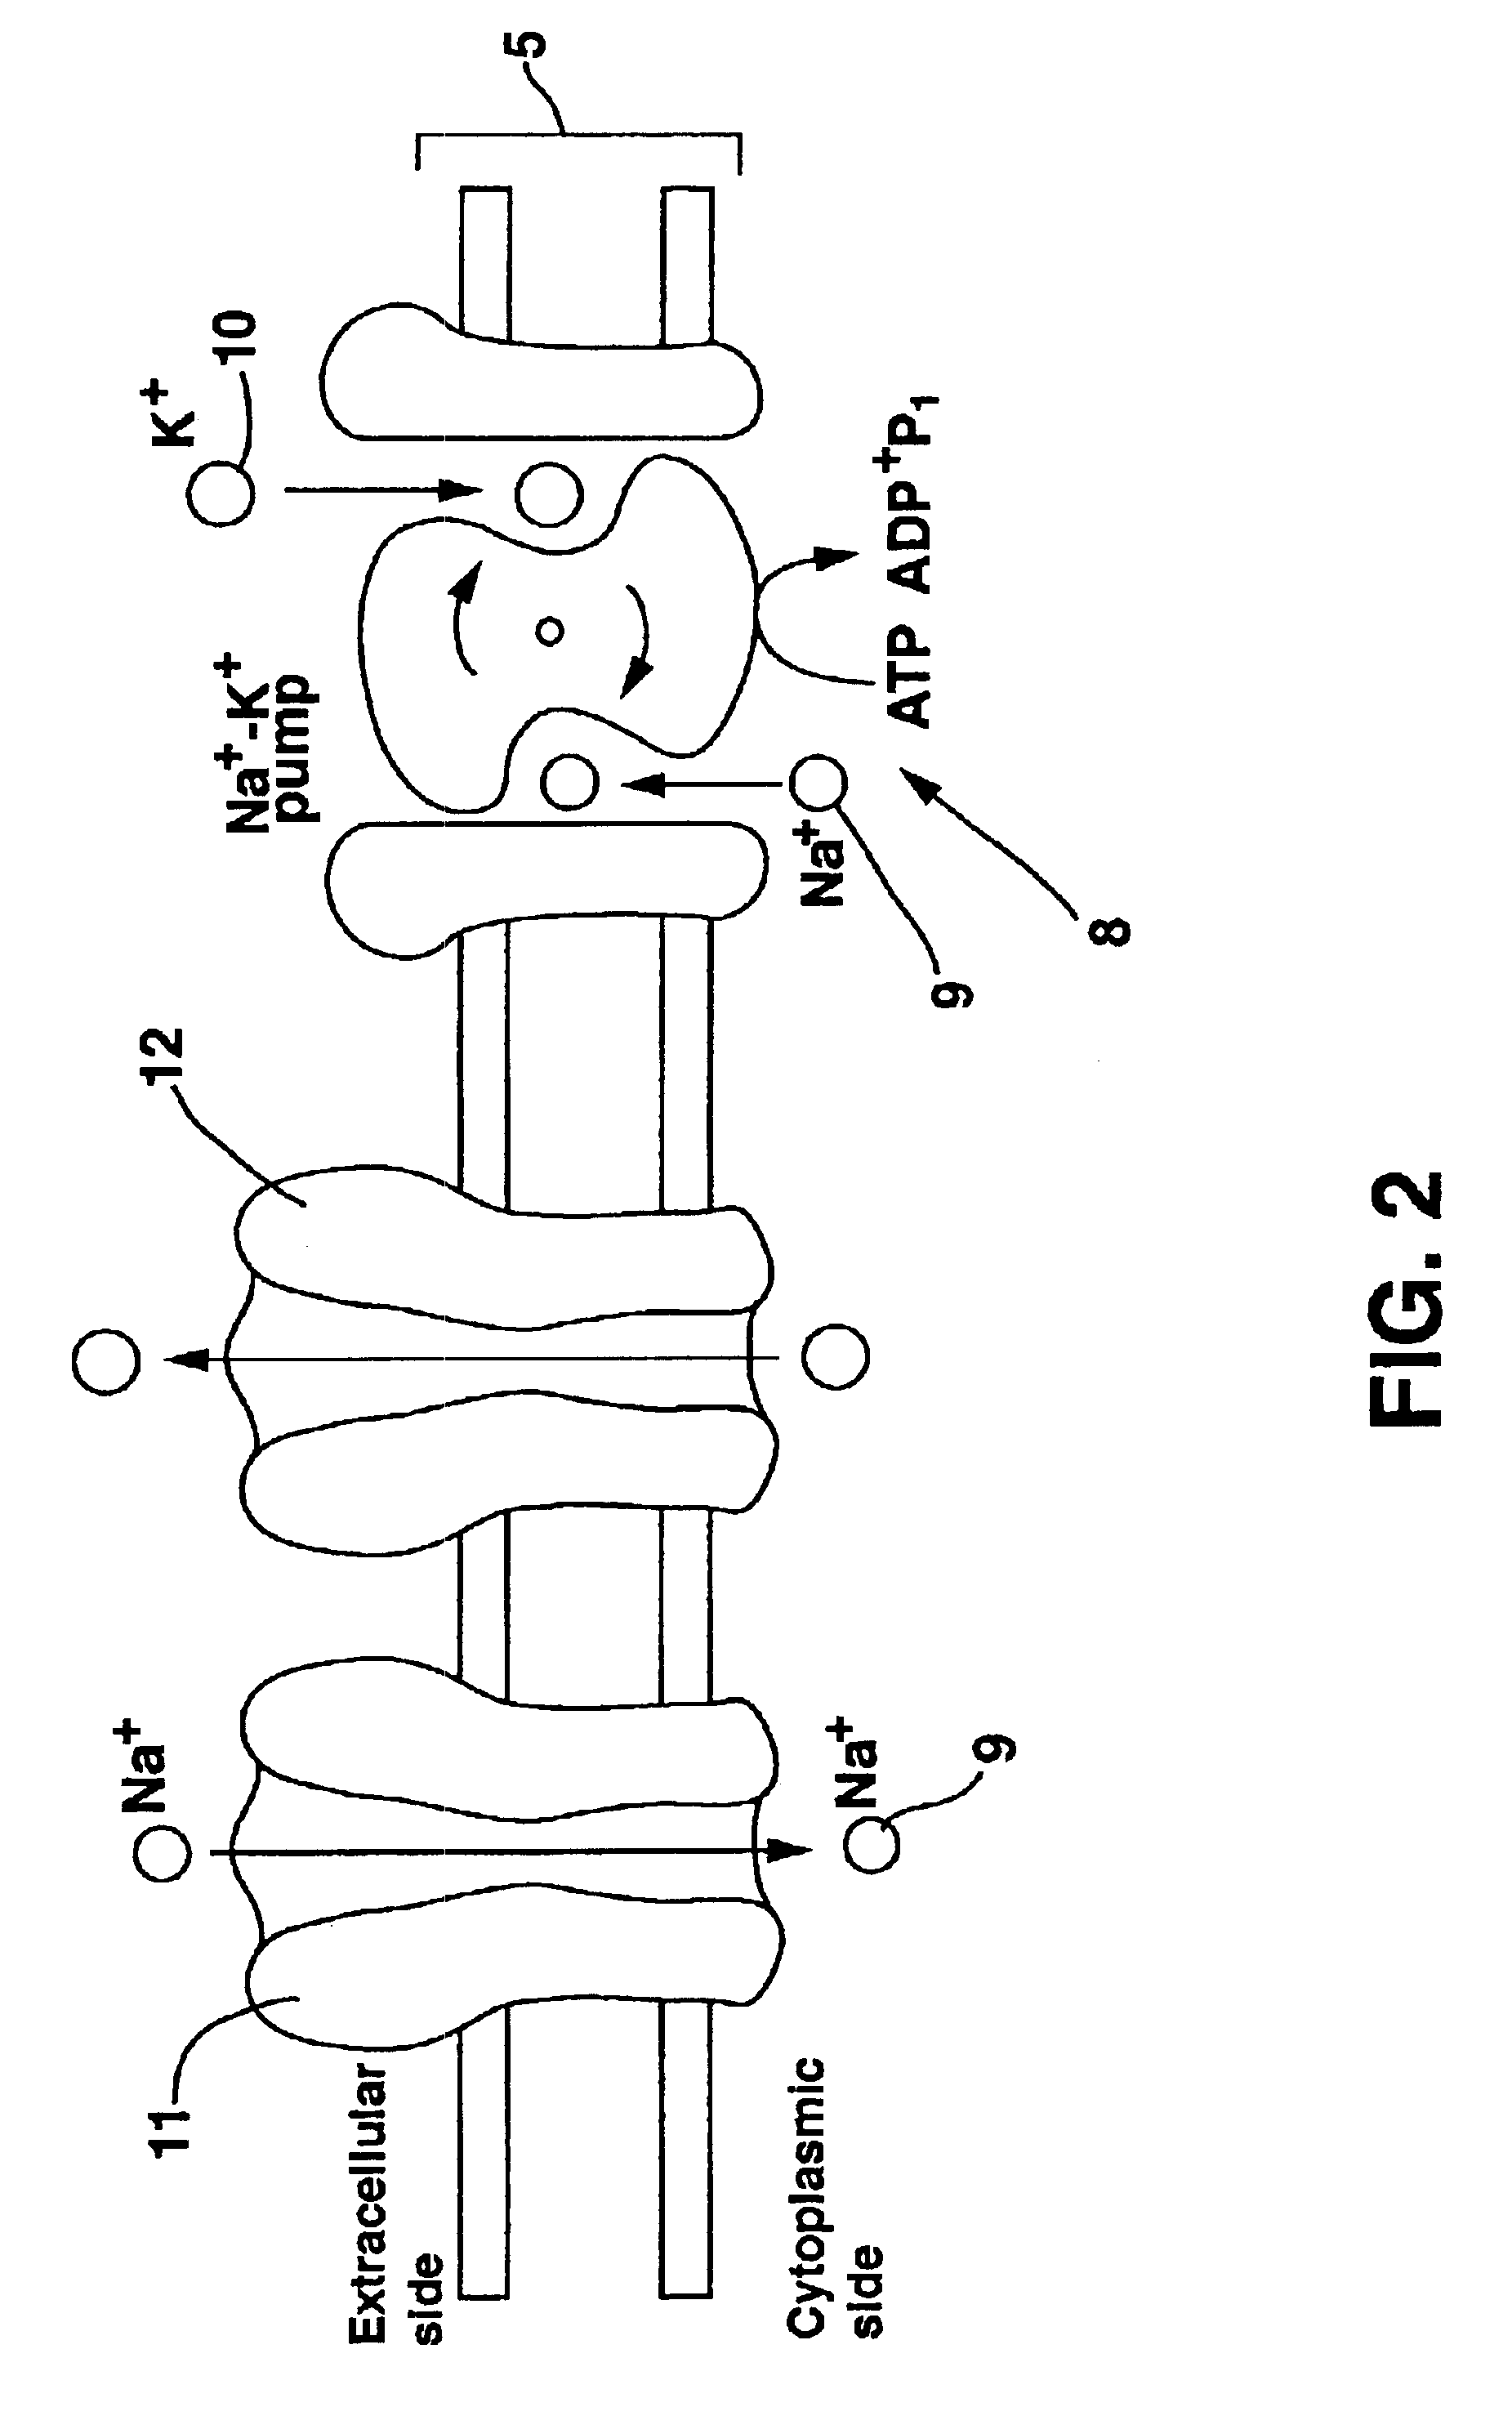 Method of preparing neural tissue of the brain for subsequent electrical stimulation